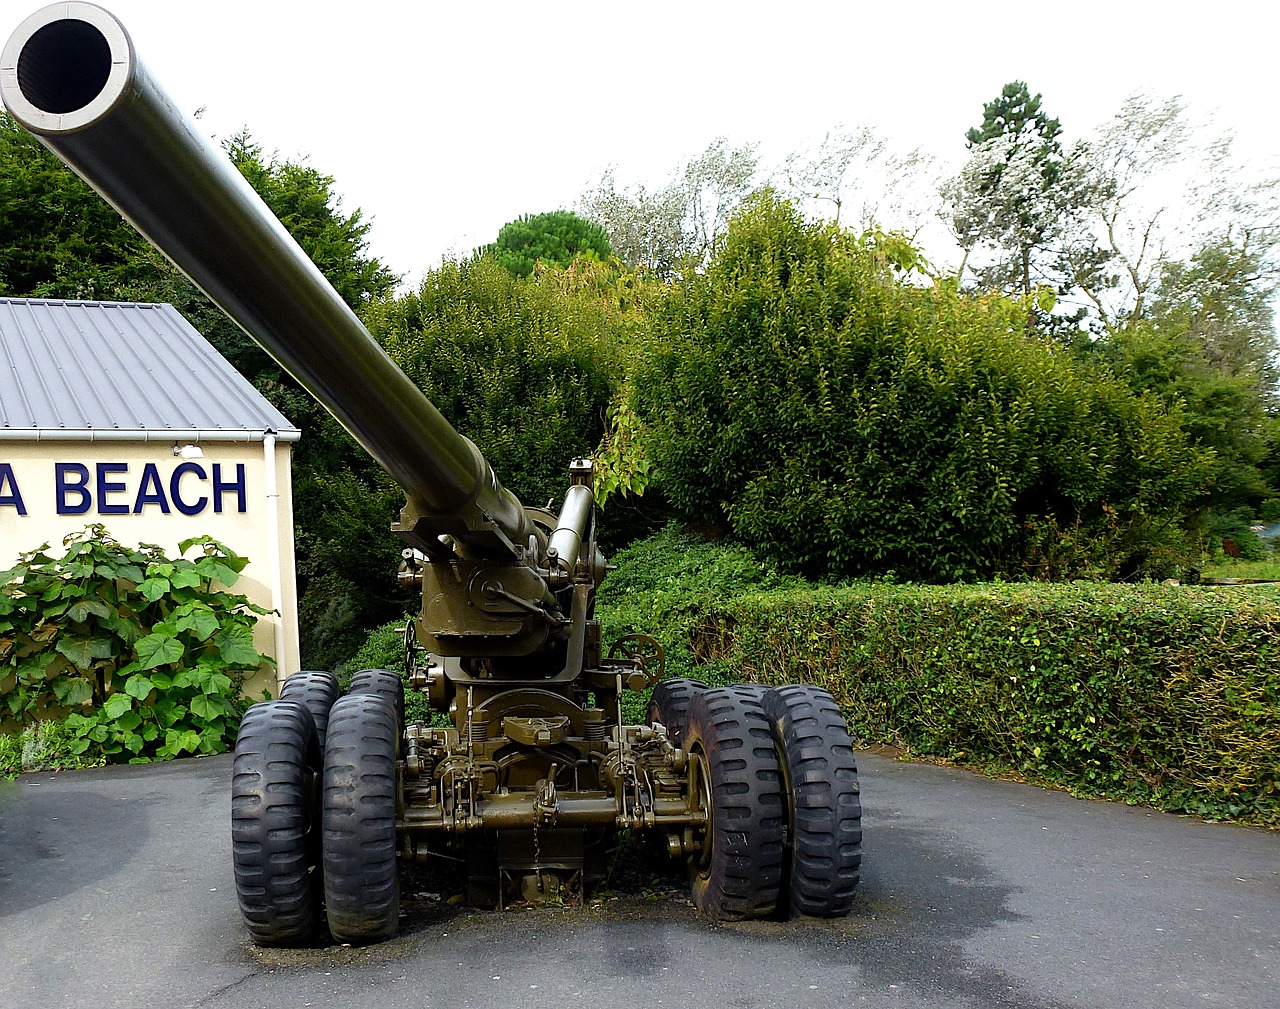 a large gun sitting in the middle of a parking lot, by Robert Brackman, flickr, dada, omaha beach, ireland, 2 arms and 2 legs!, breath taking